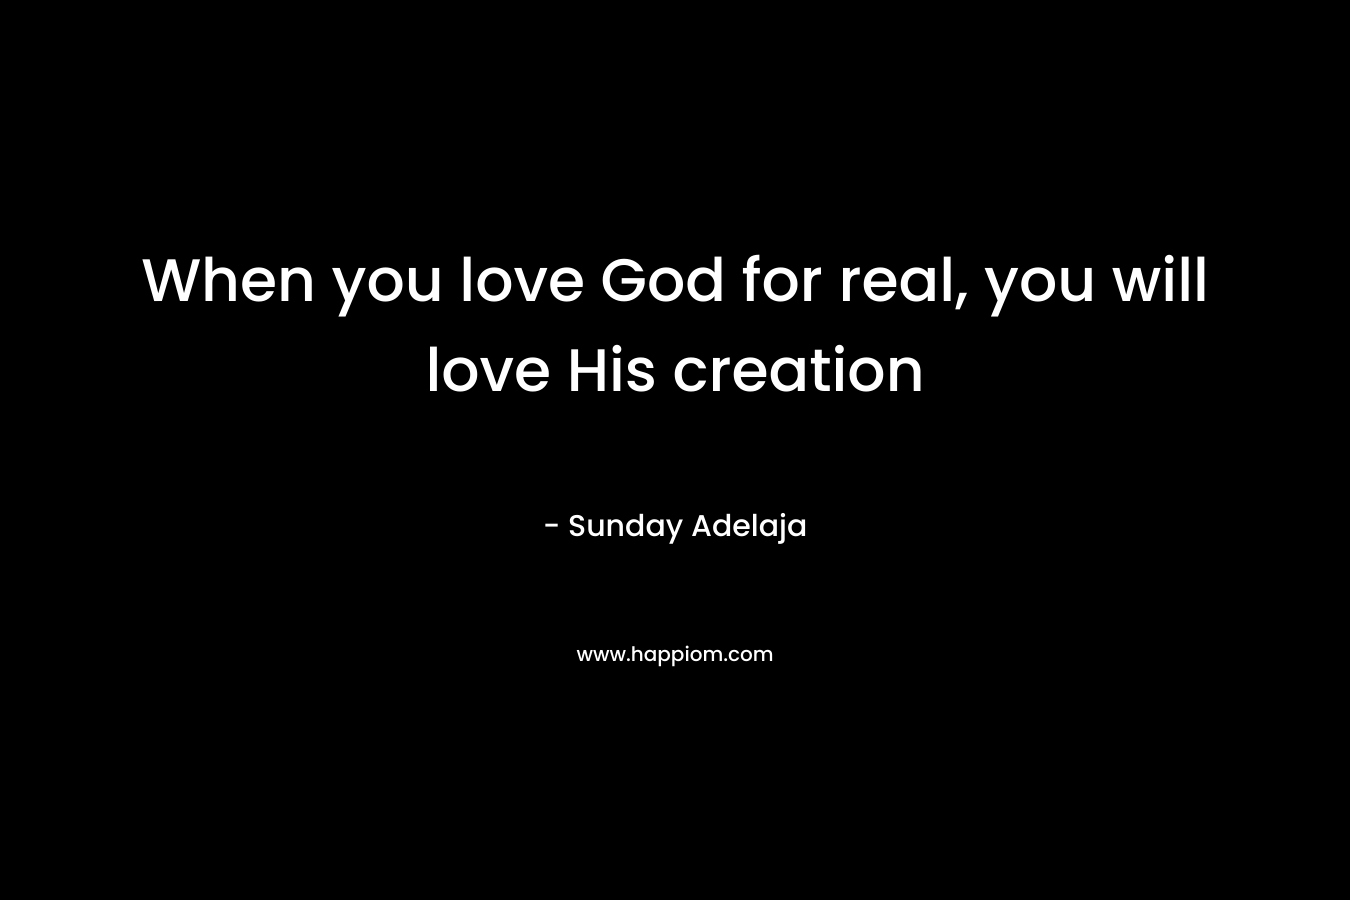 When you love God for real, you will love His creation